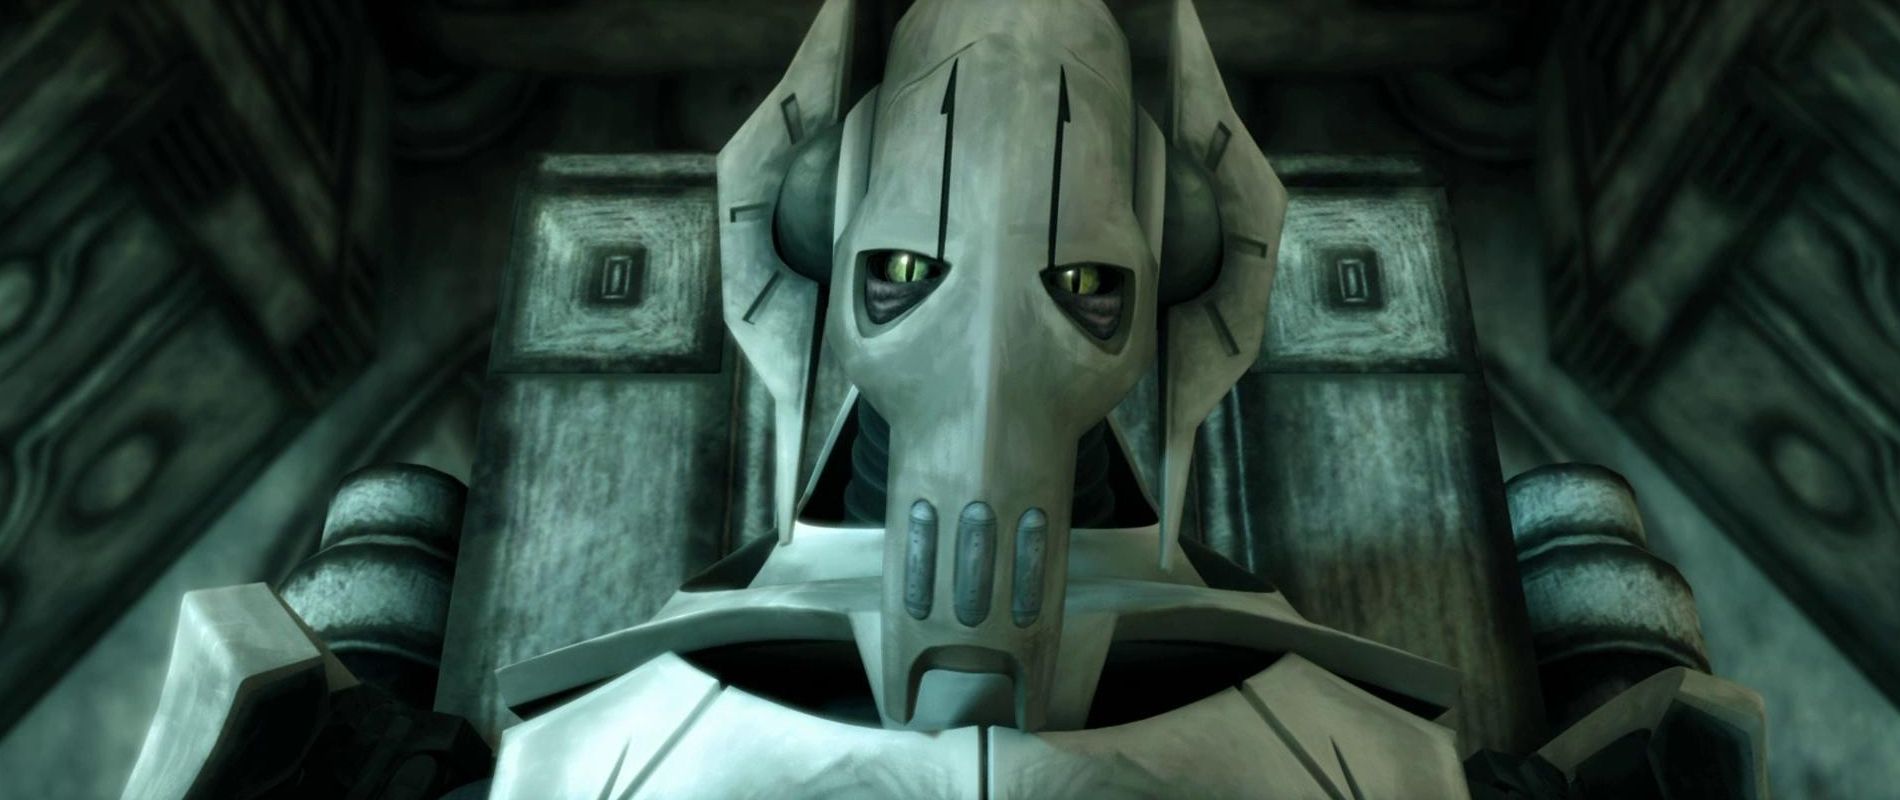 General Grievous sitting in a large grey chair in Star Wars The Clone Wars